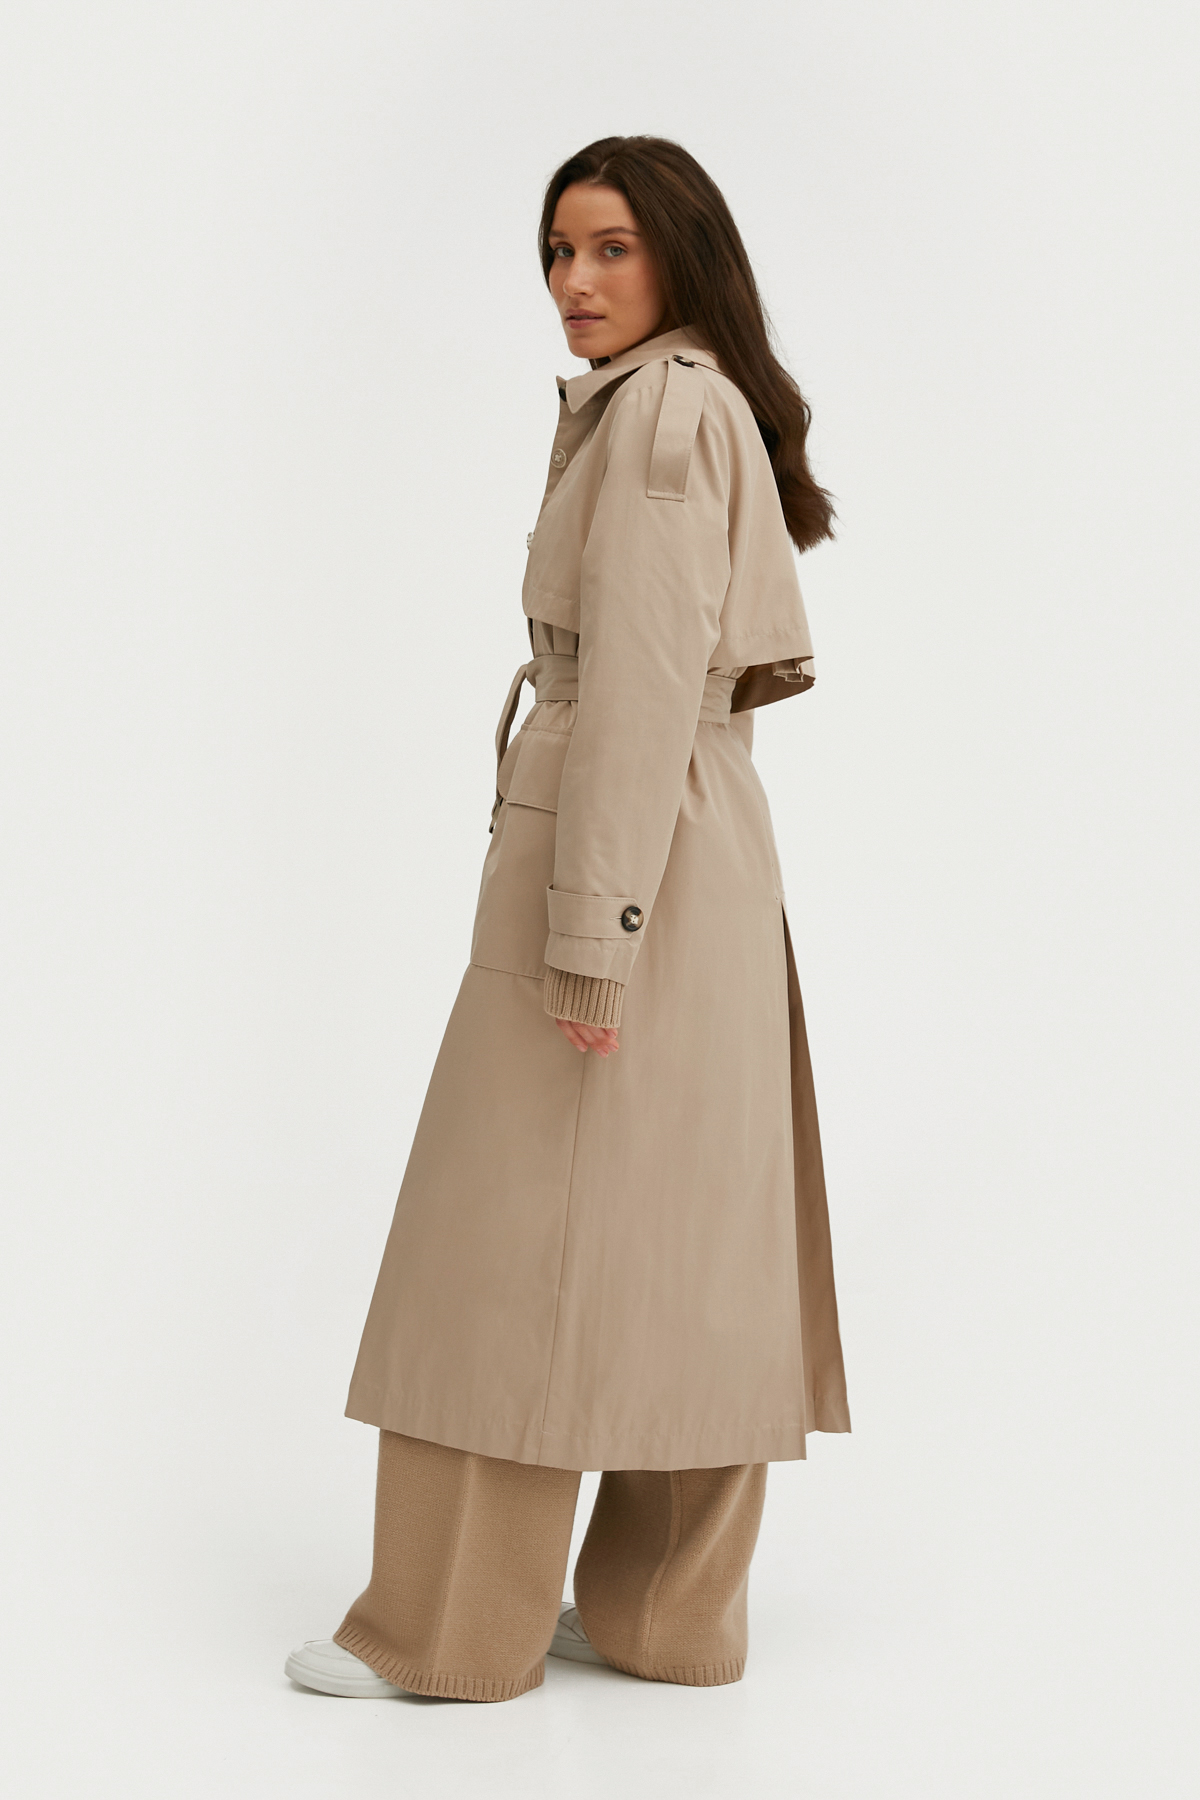 Beige trench coat with a straight silhouette, photo 1